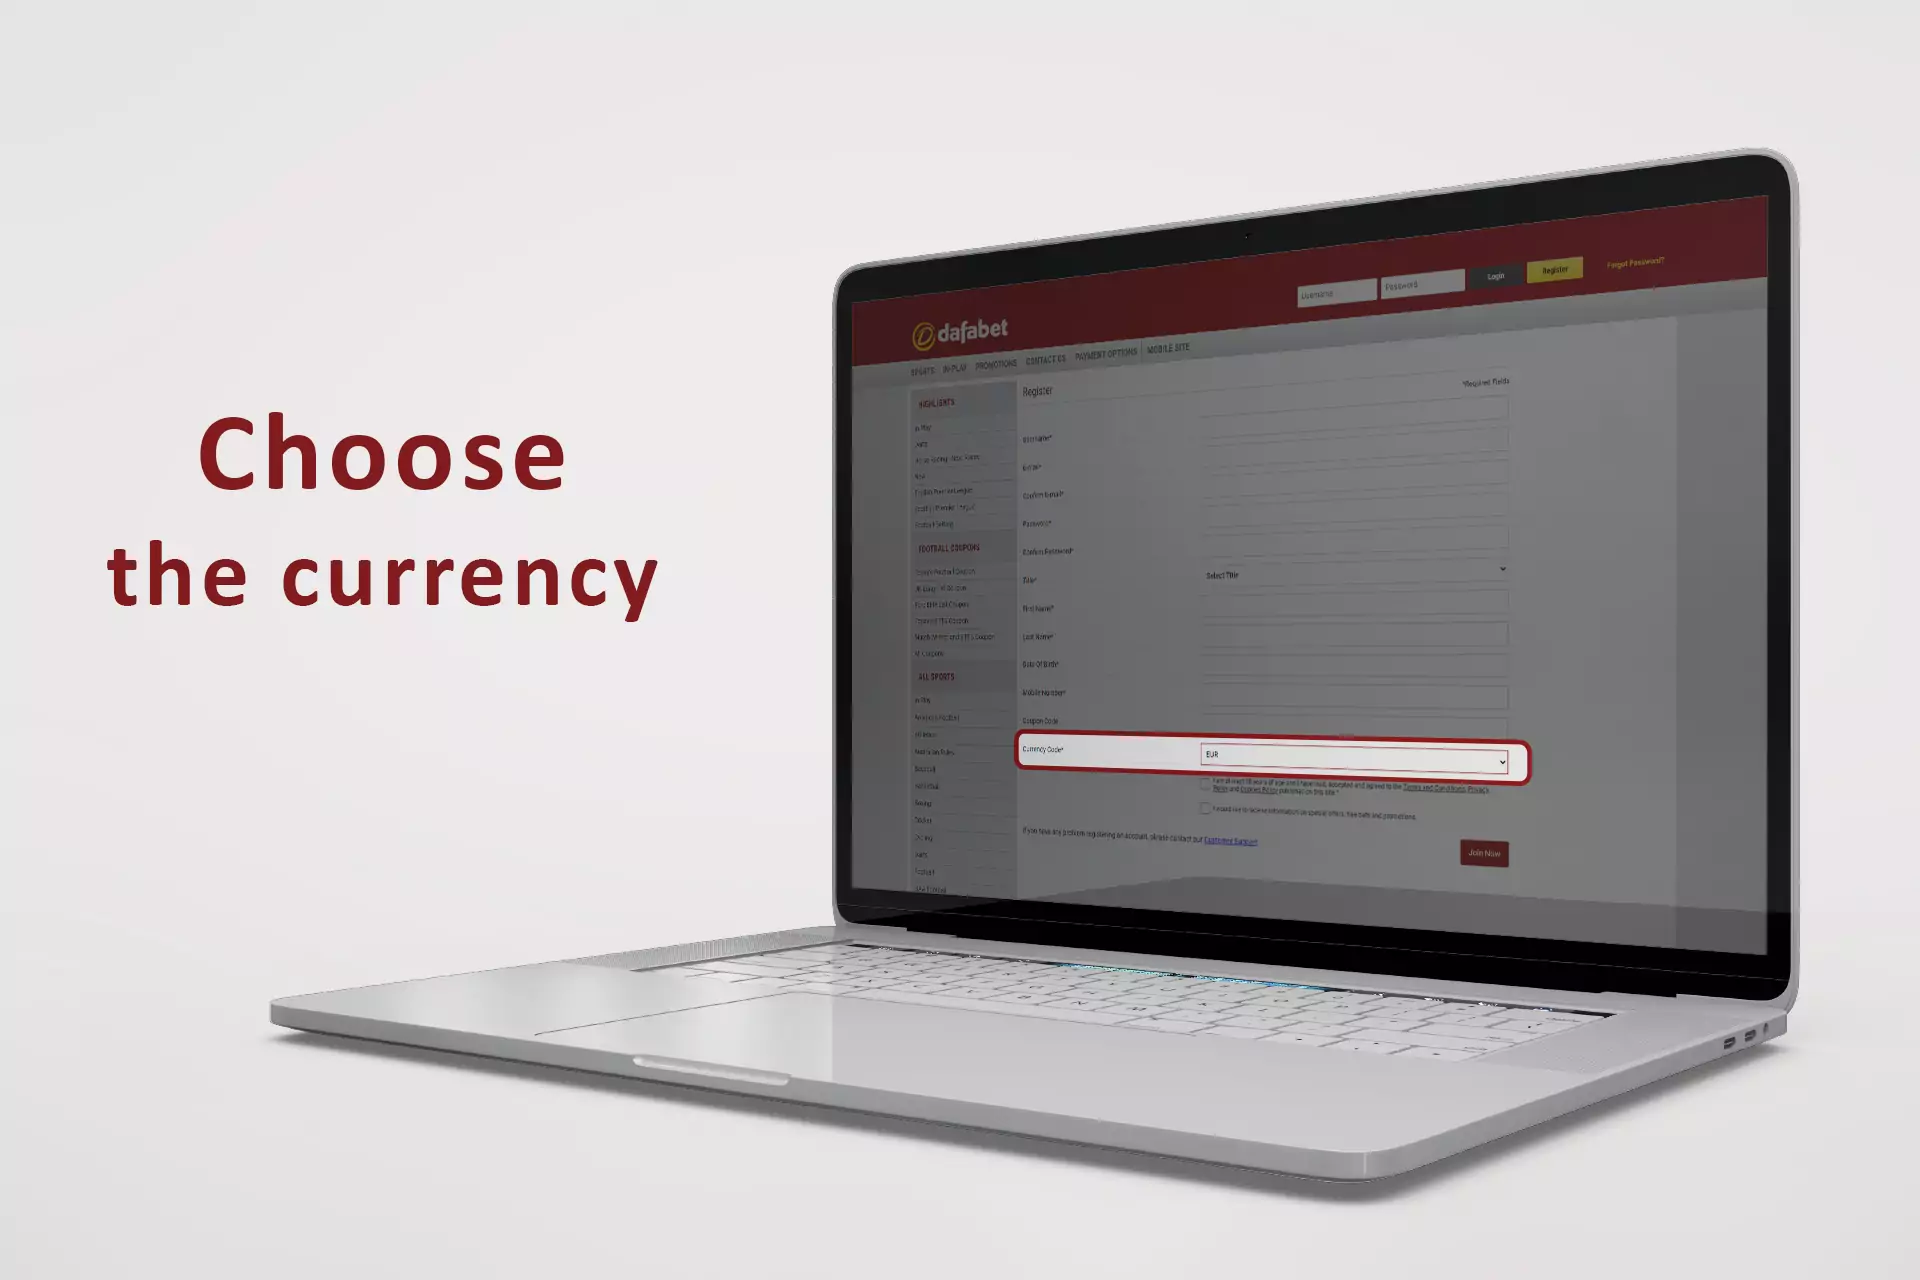 Choose one of the available currencies.